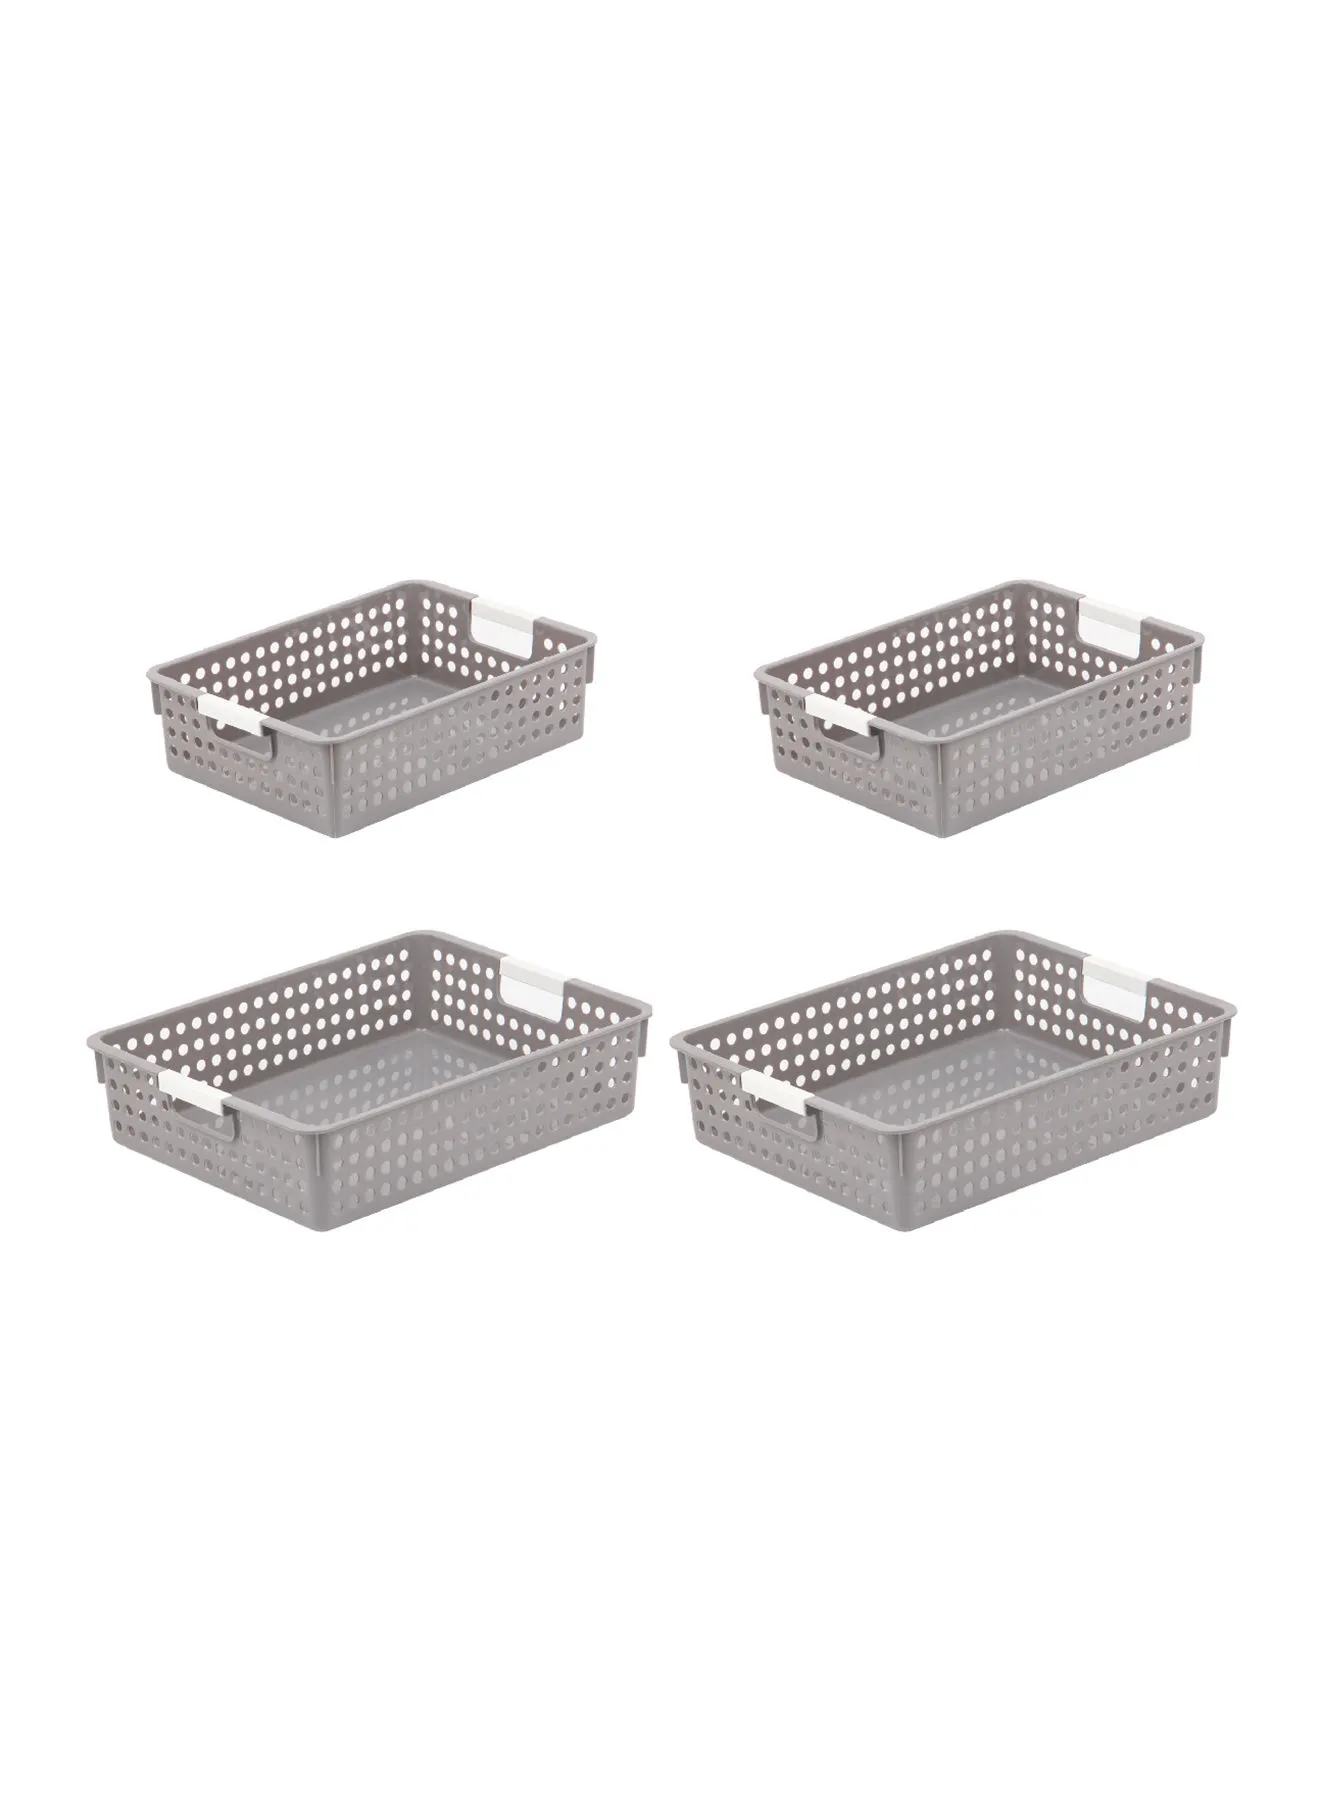 Amal 4-Piece Circle Storage Basket Set Convenient to use Daily Simple Storage Hygenic and Organised TG54414S4 Grey